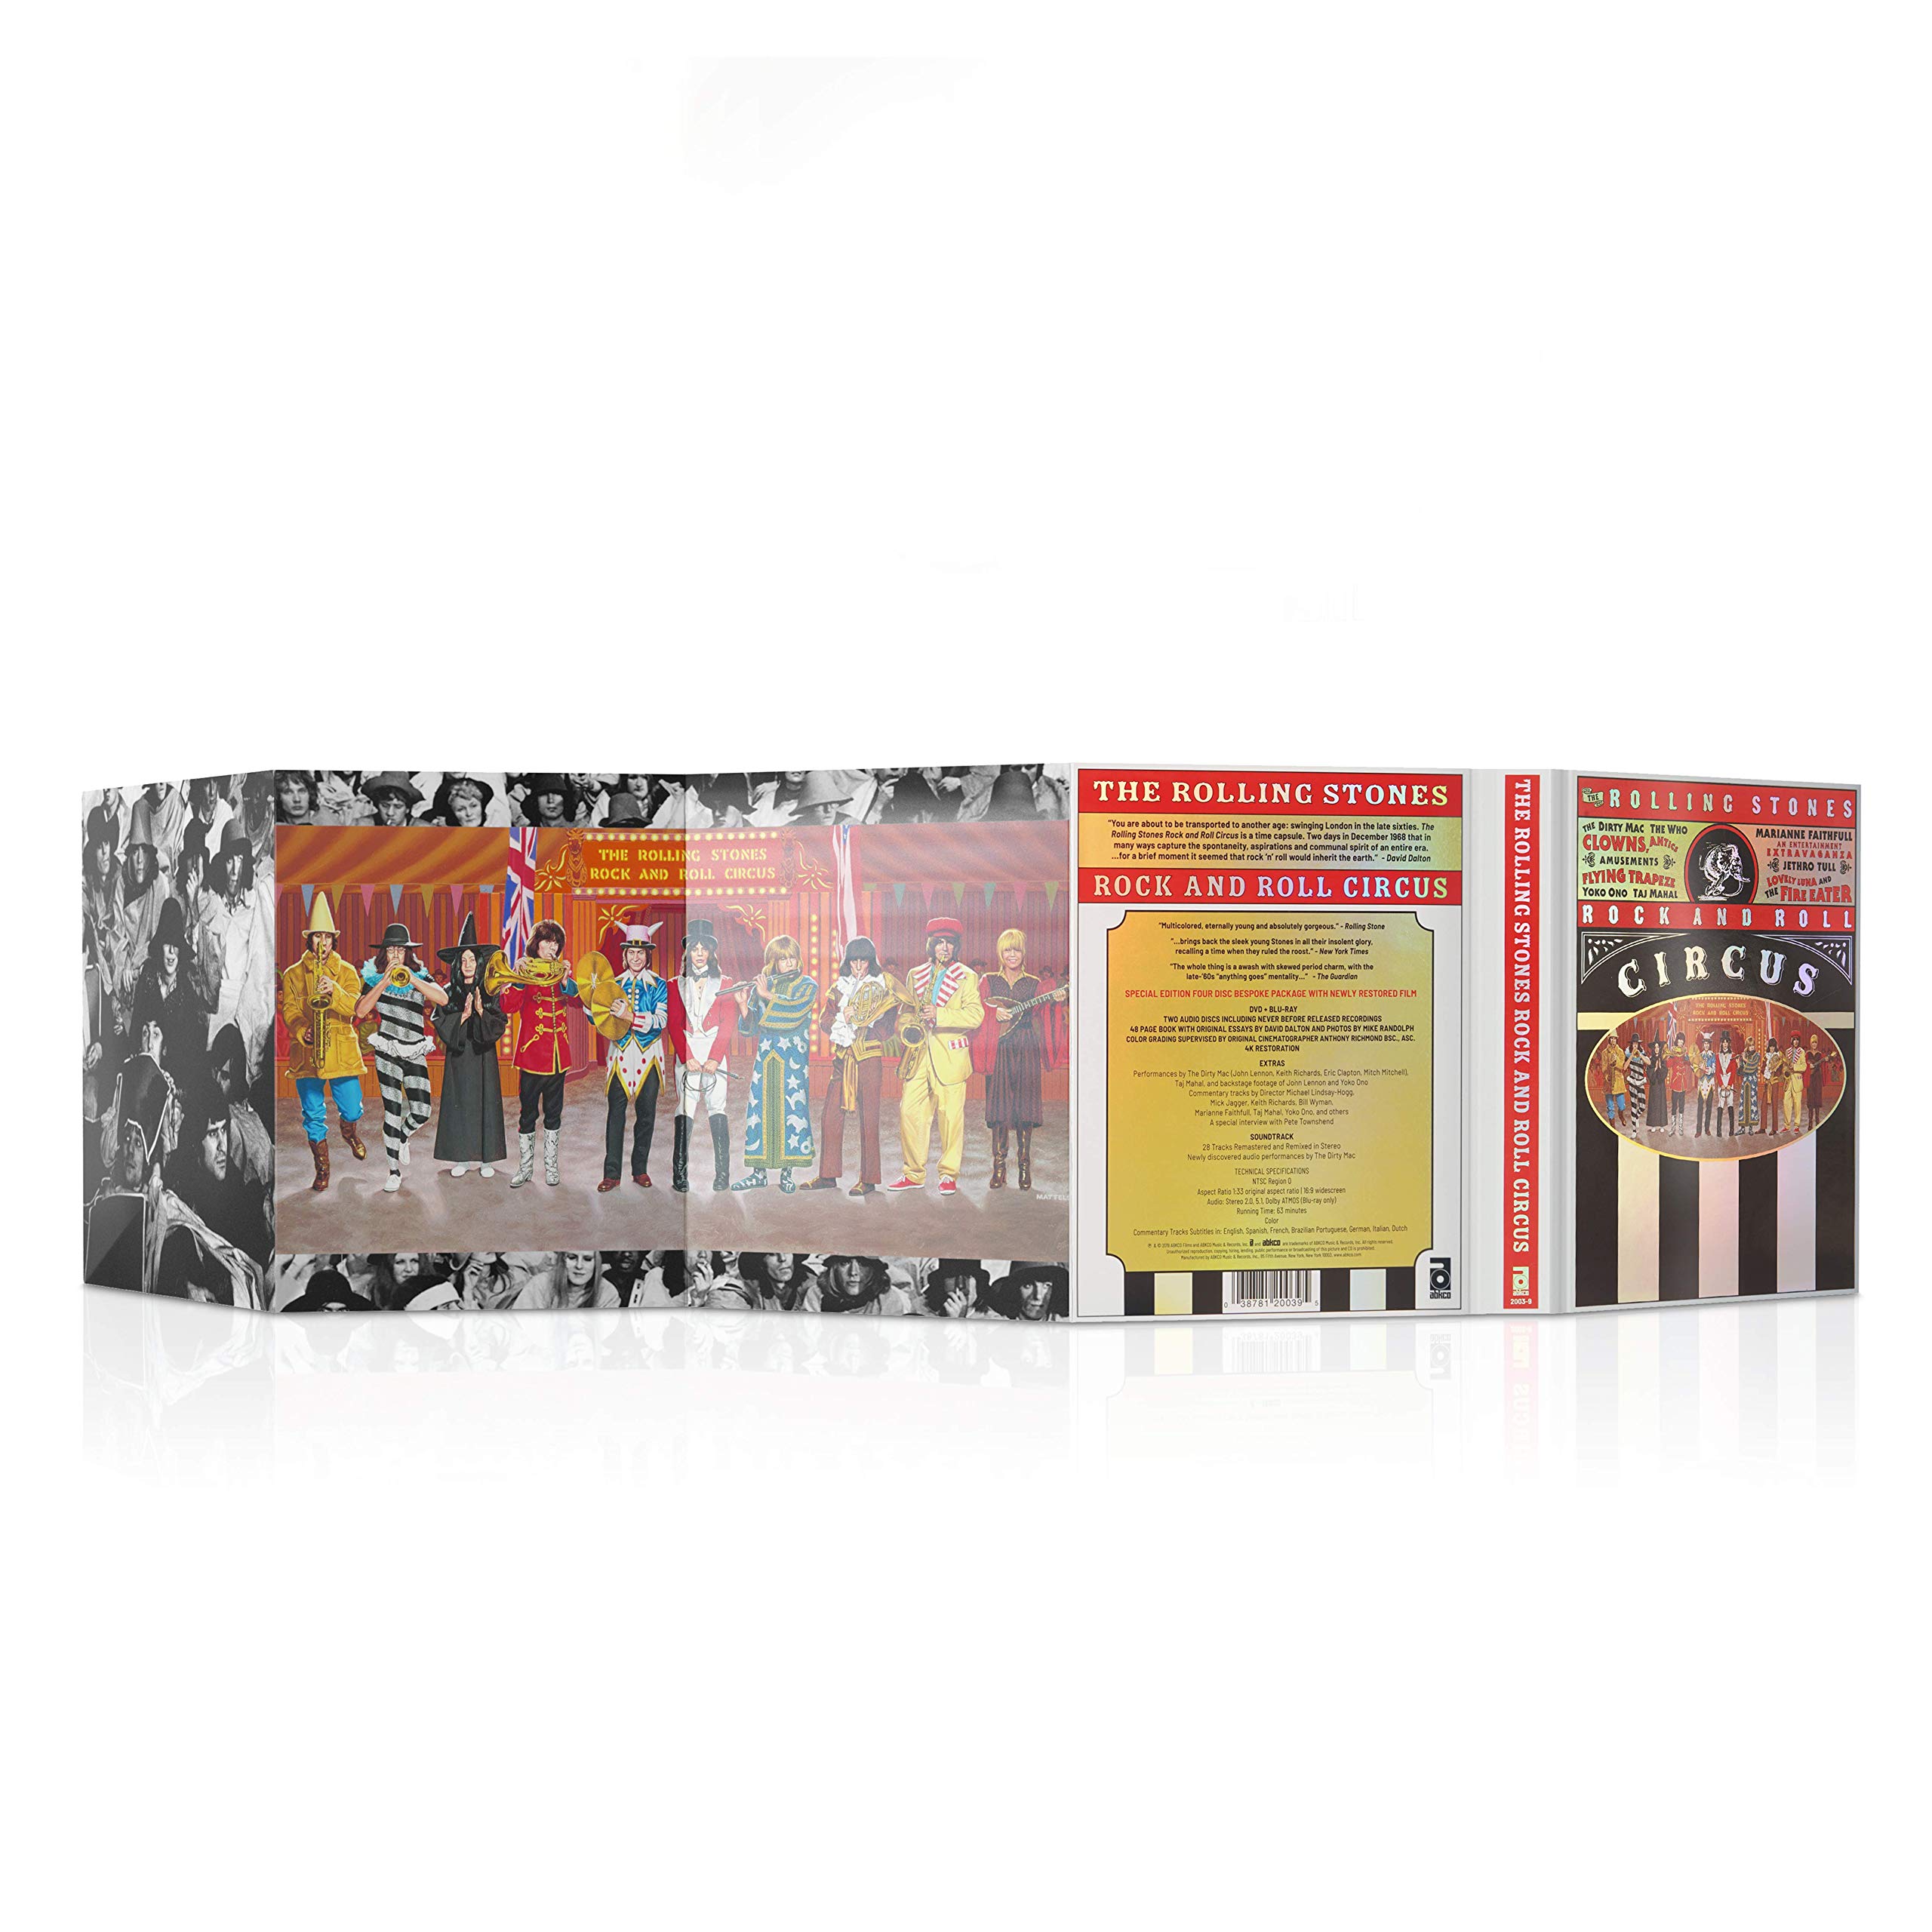 The Rolling Stones Rock and Roll Circus (Limited Deluxe Edition)